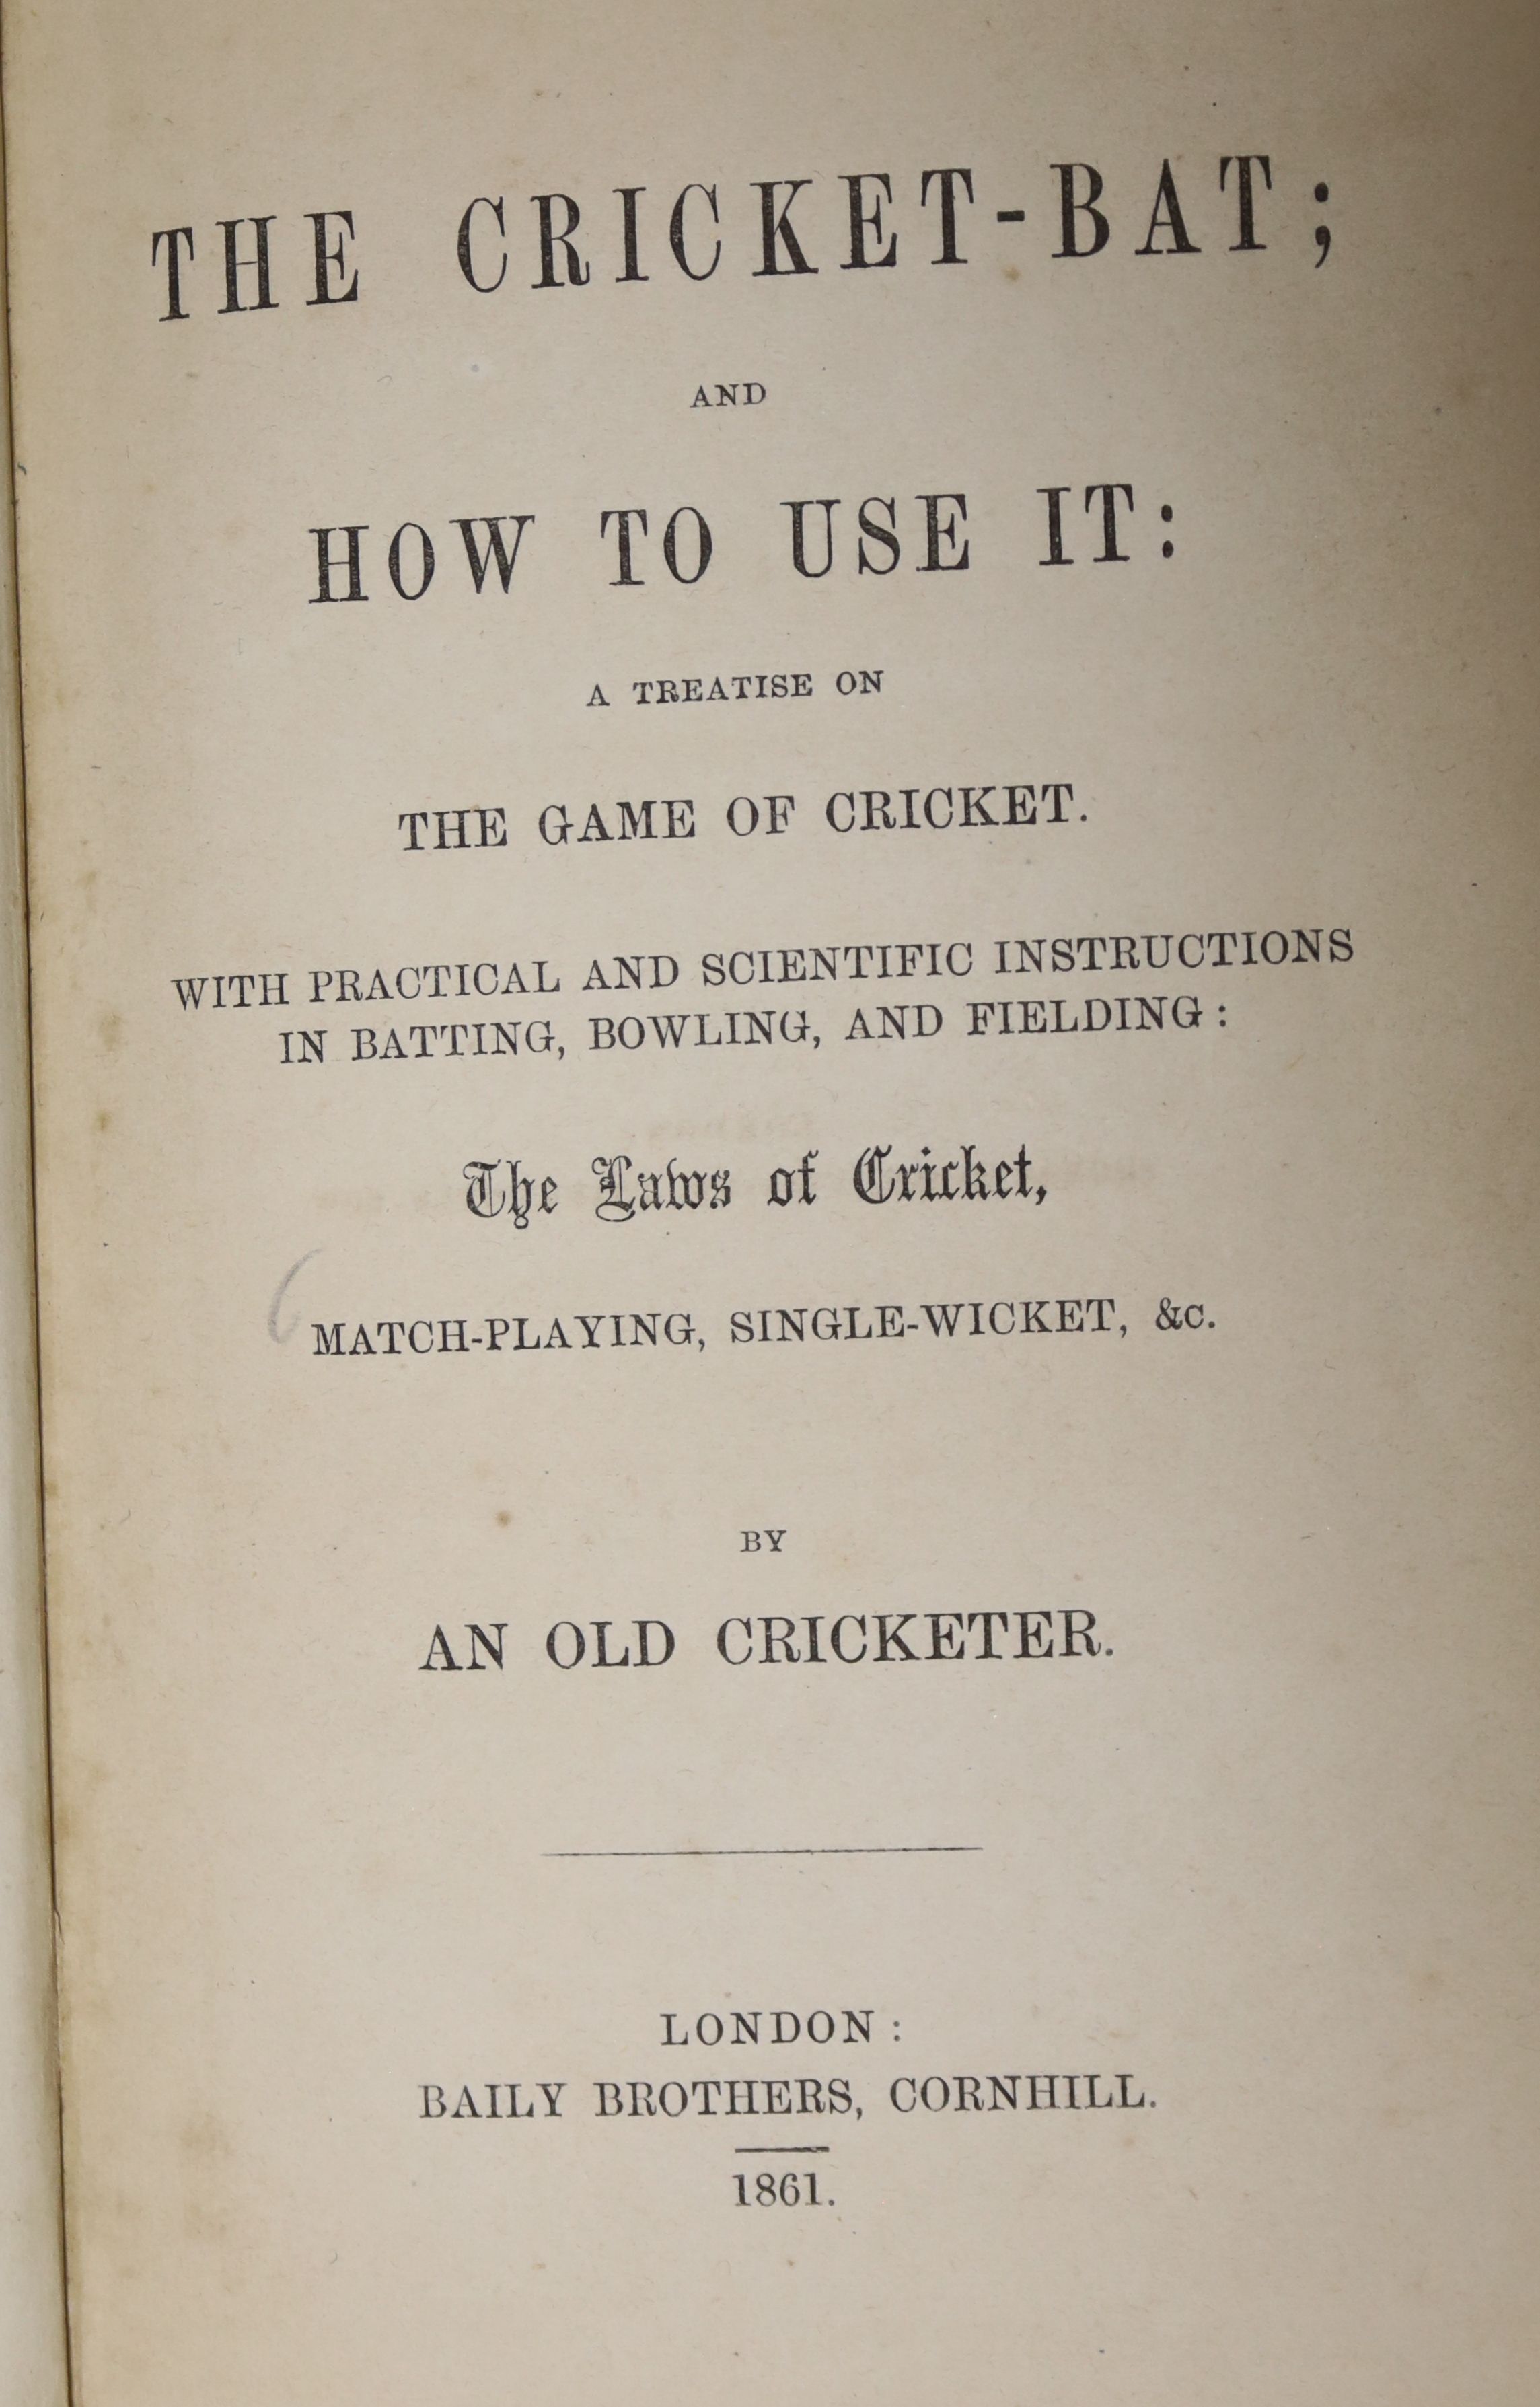 [Wanostrocht, Nicholas] - The Cricket-Bat; and How To Use It; a treatise on the game of cricket ..., by An Old Cricketer, (4), 96pp,